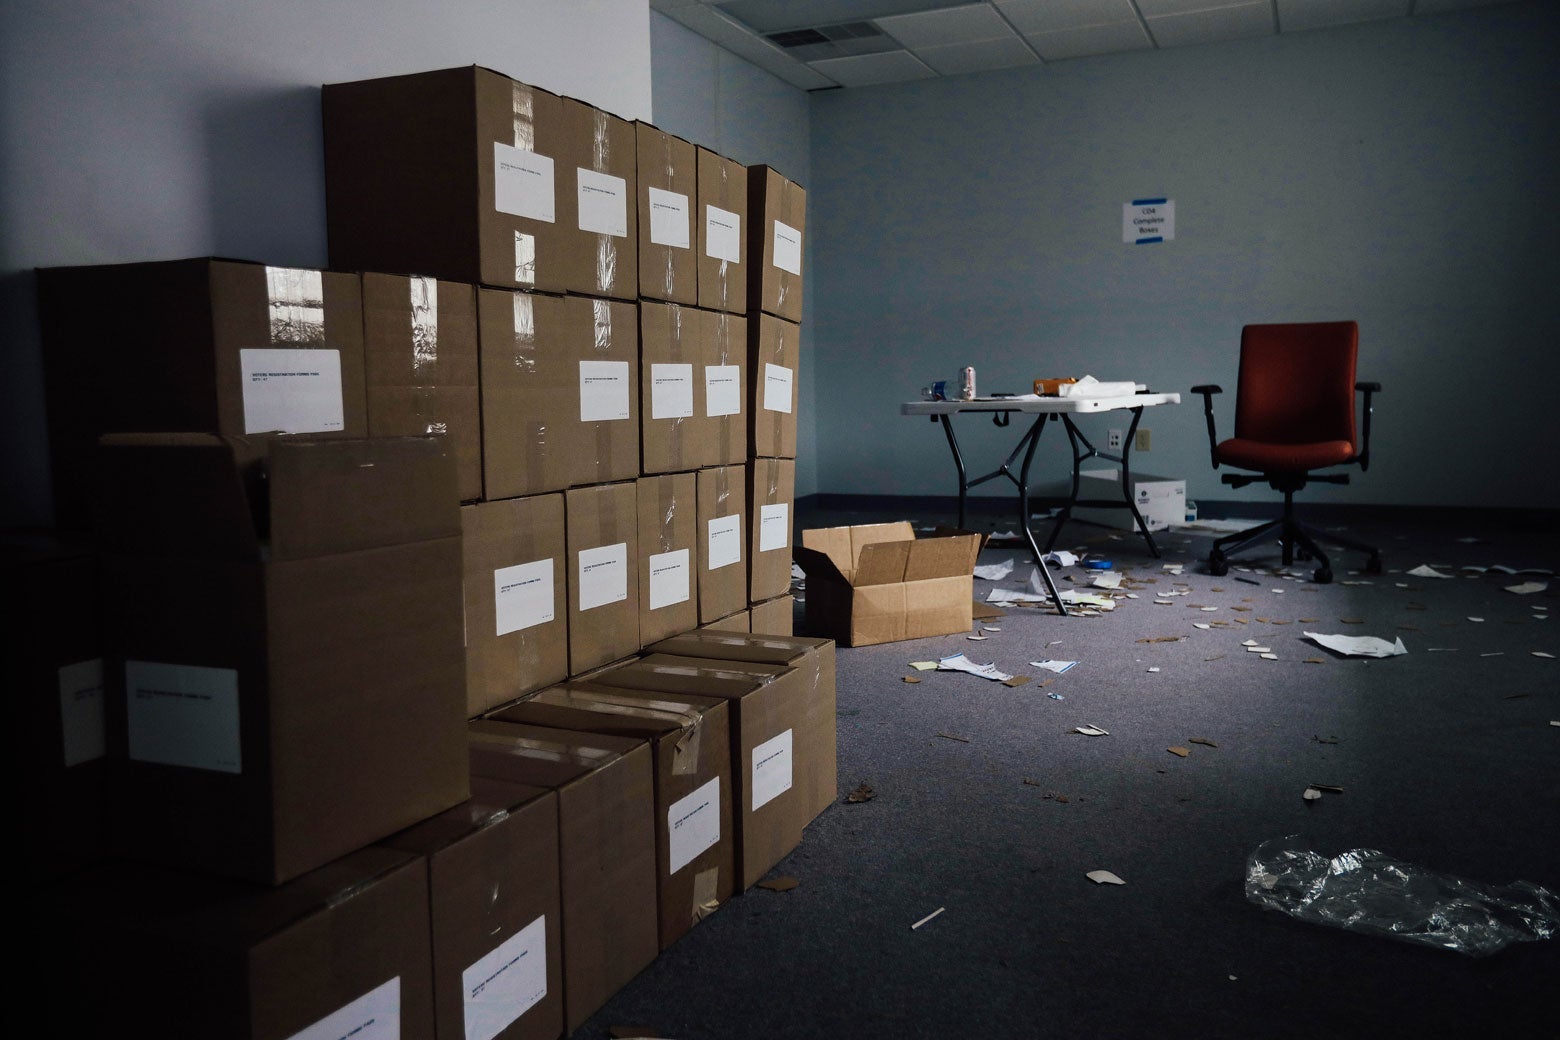 Boxes are stacked in room. In the back, a desk and chair stand, with pieces of paper scattered around.